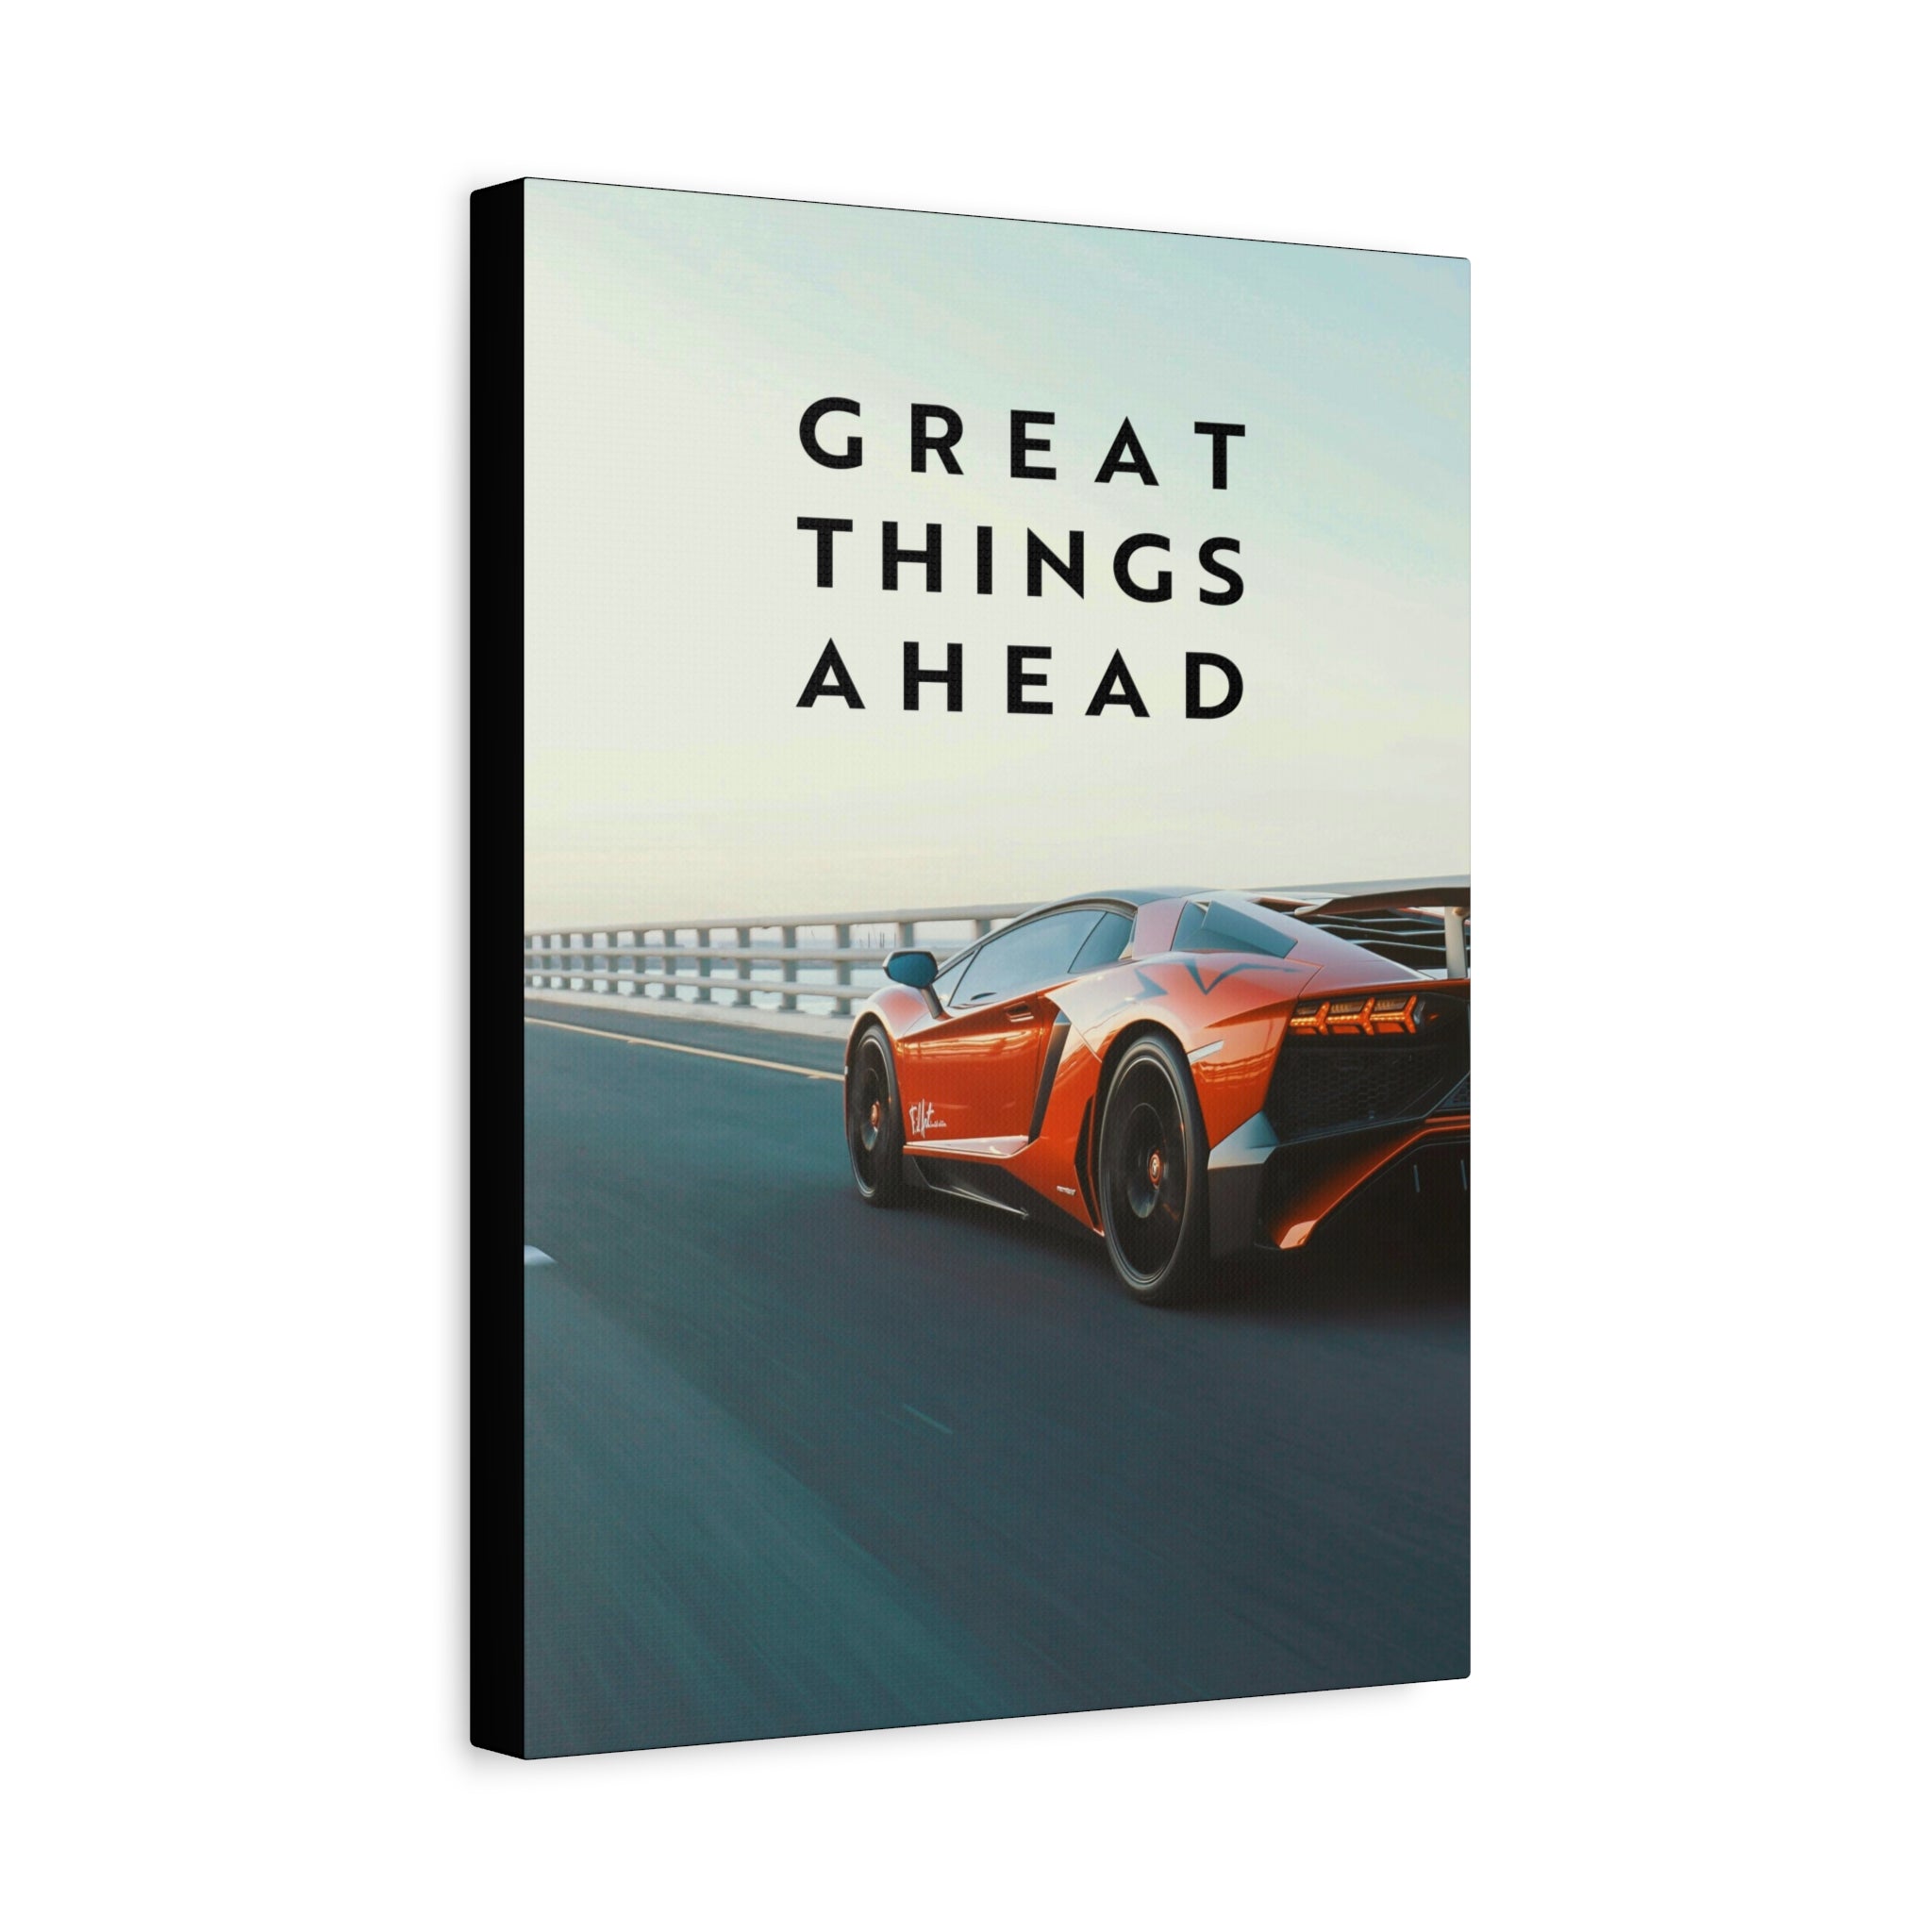 Great Things Ahead - Sports Car - Wall Art additional image 1